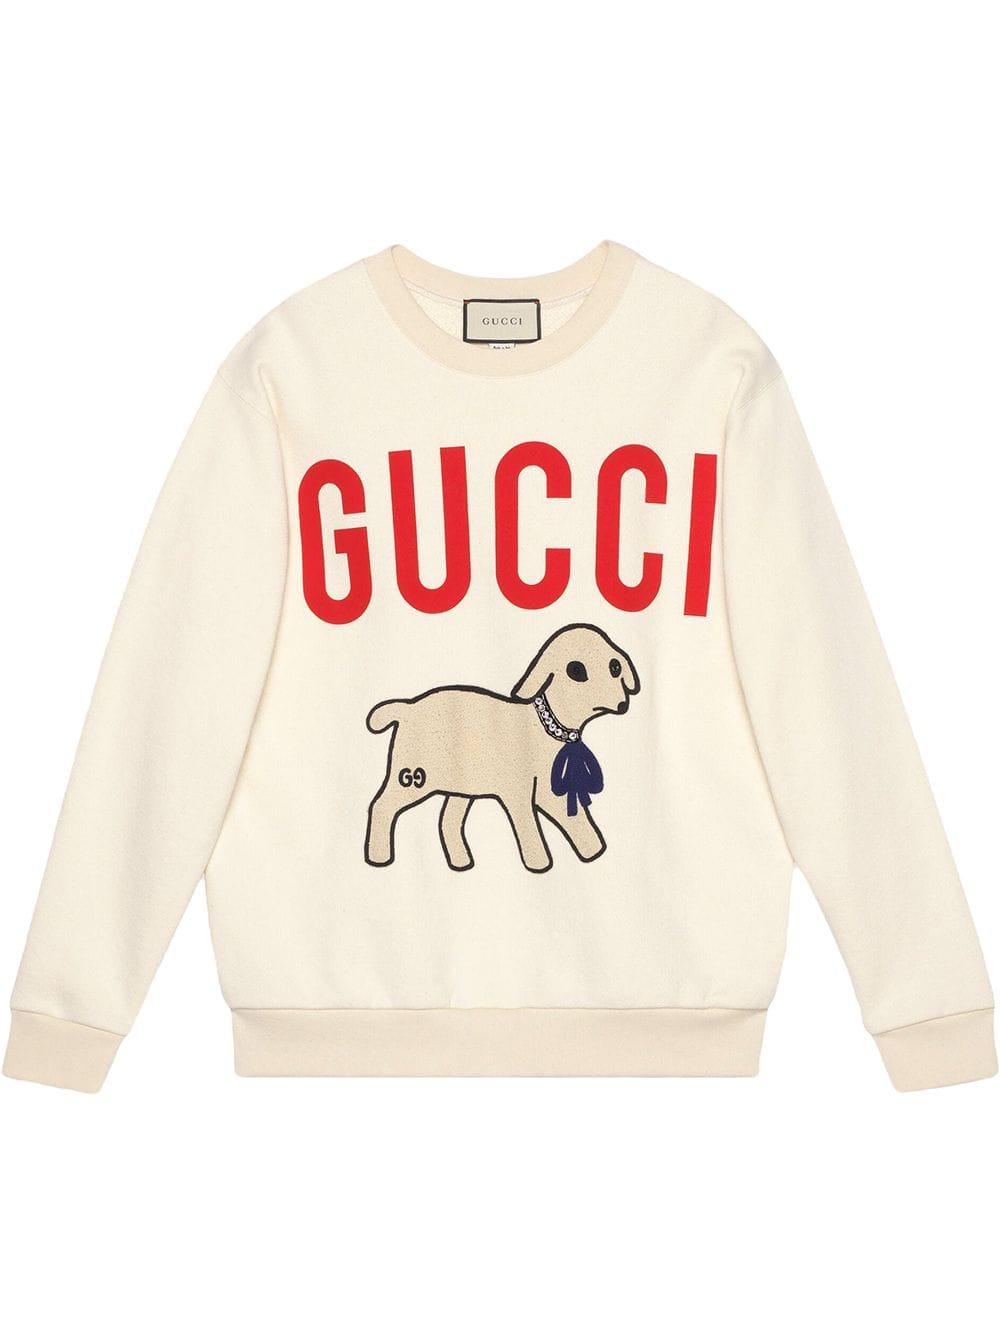 Gucci Cotton Lamb Patch Oversized Sweatshirt in White | Lyst